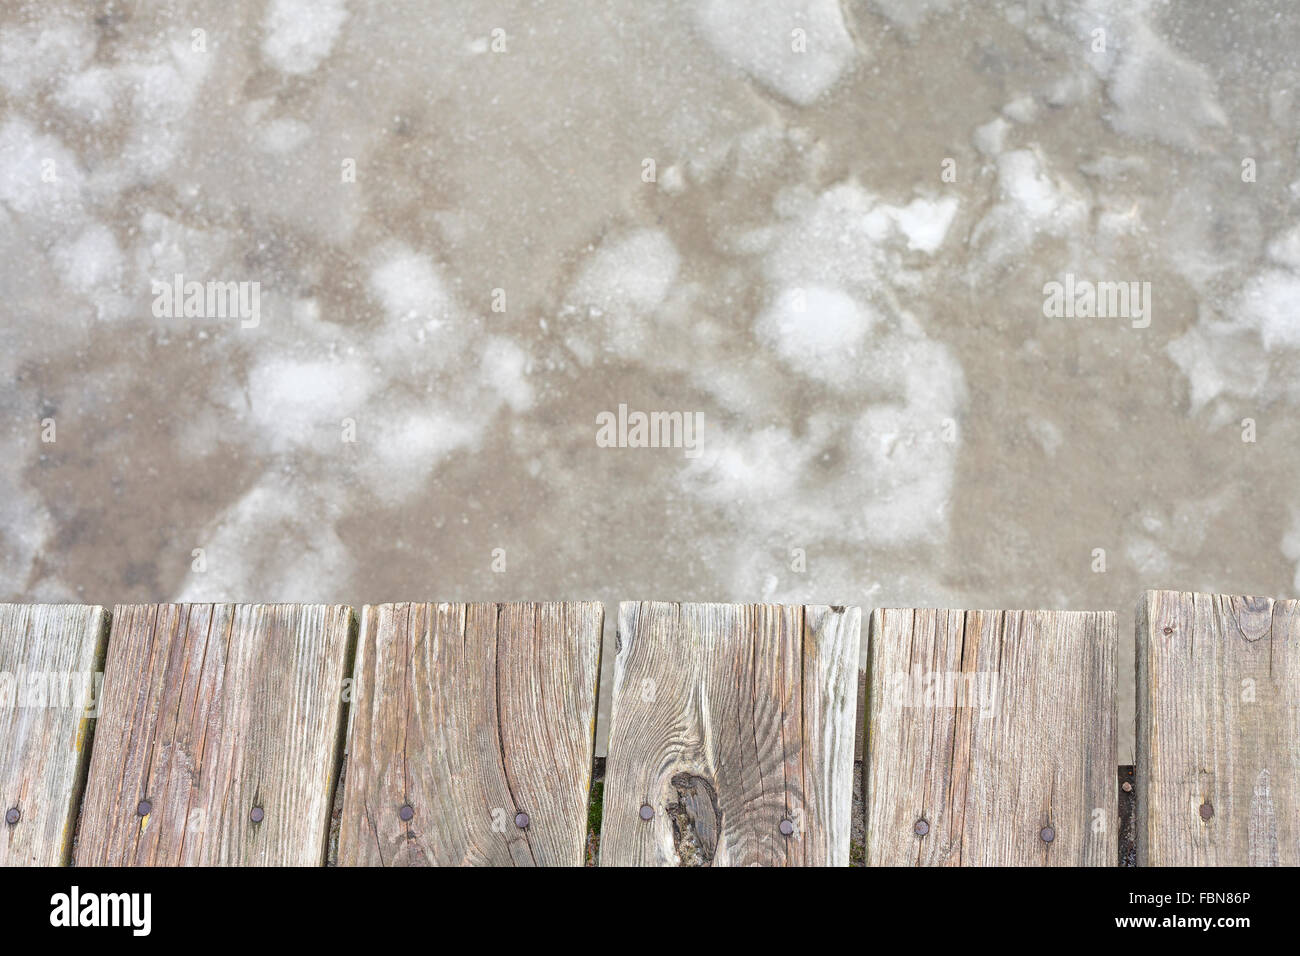 Old wooden pier on ice, abstract background with space for text. Stock Photo